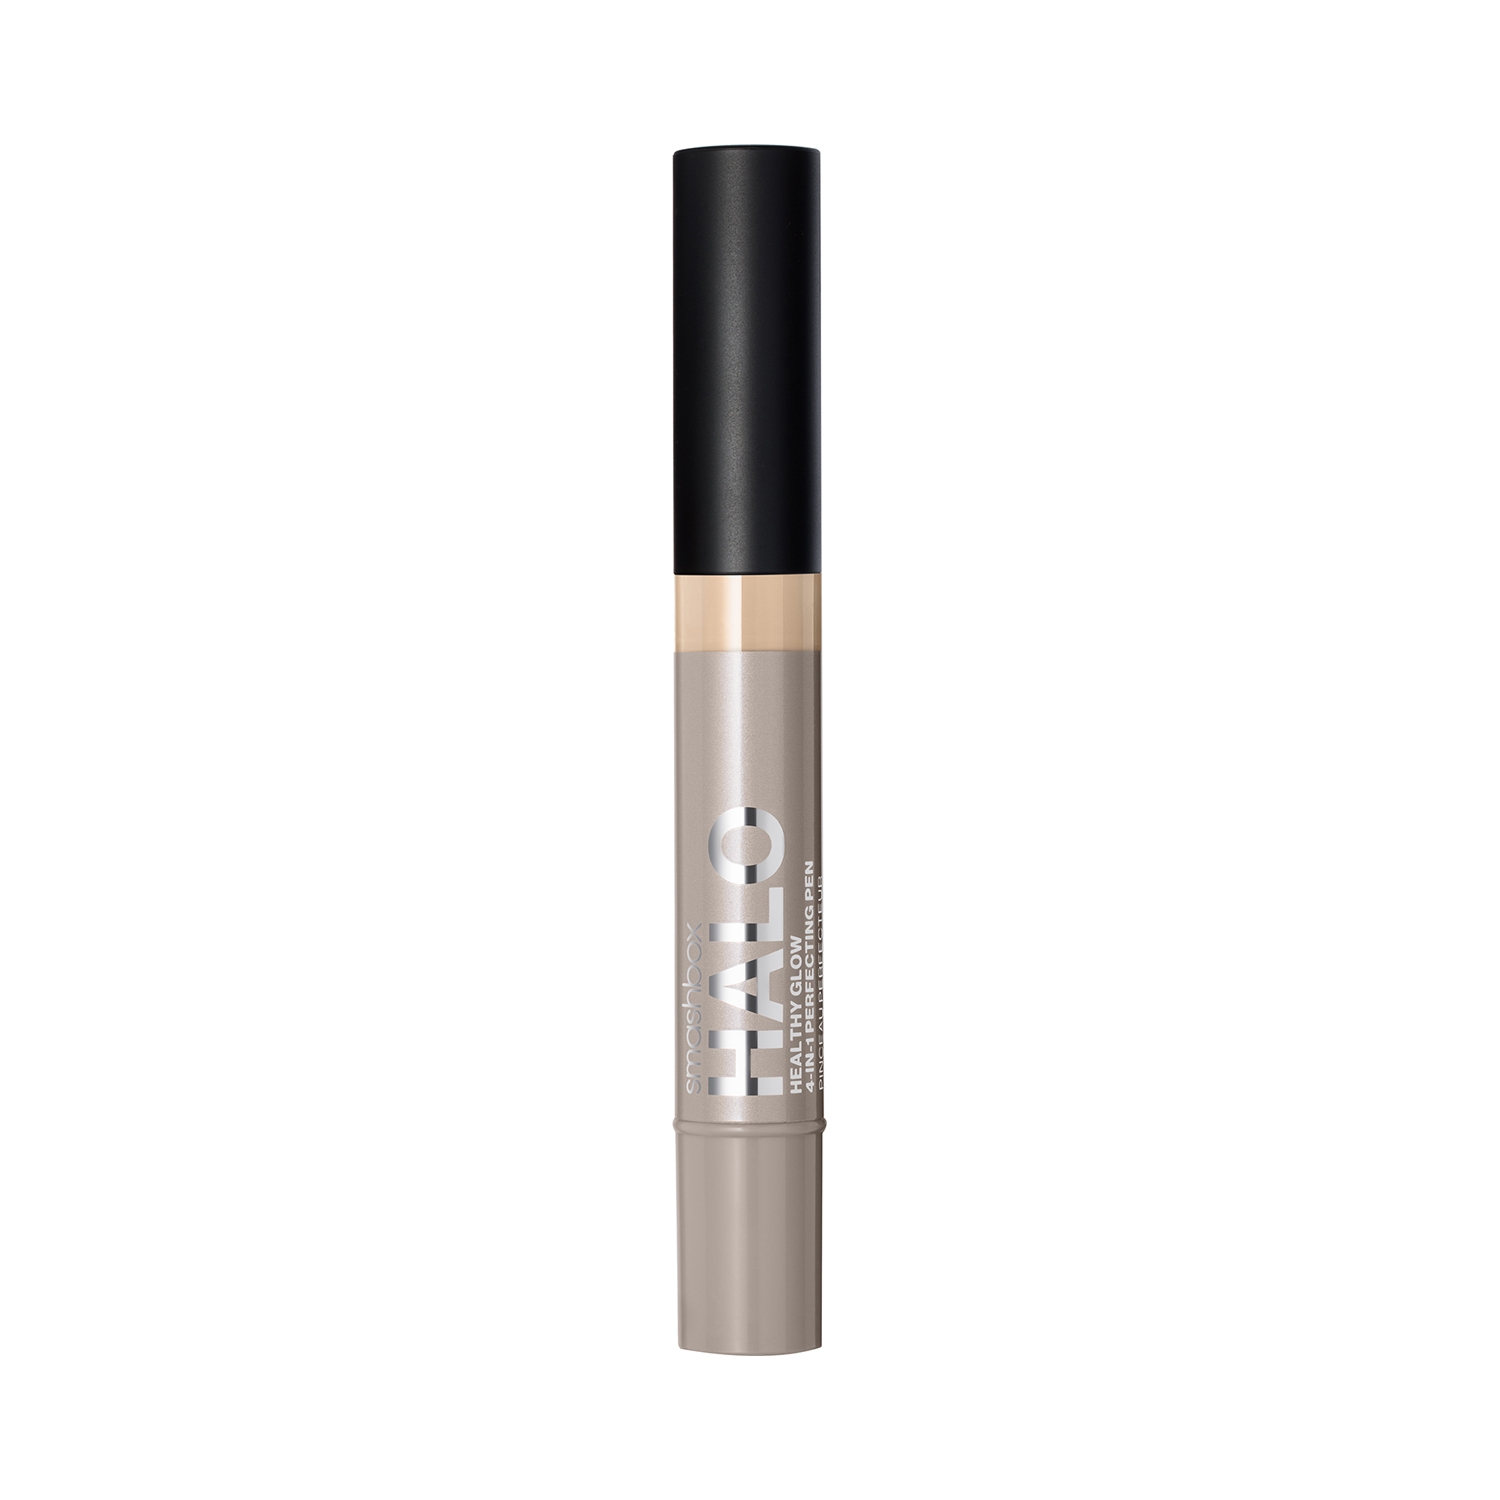 Smashbox | Smashbox Halo Healthy Glow 4-In-1 Perfecting Concealer Pen - F20N (3.5ml)